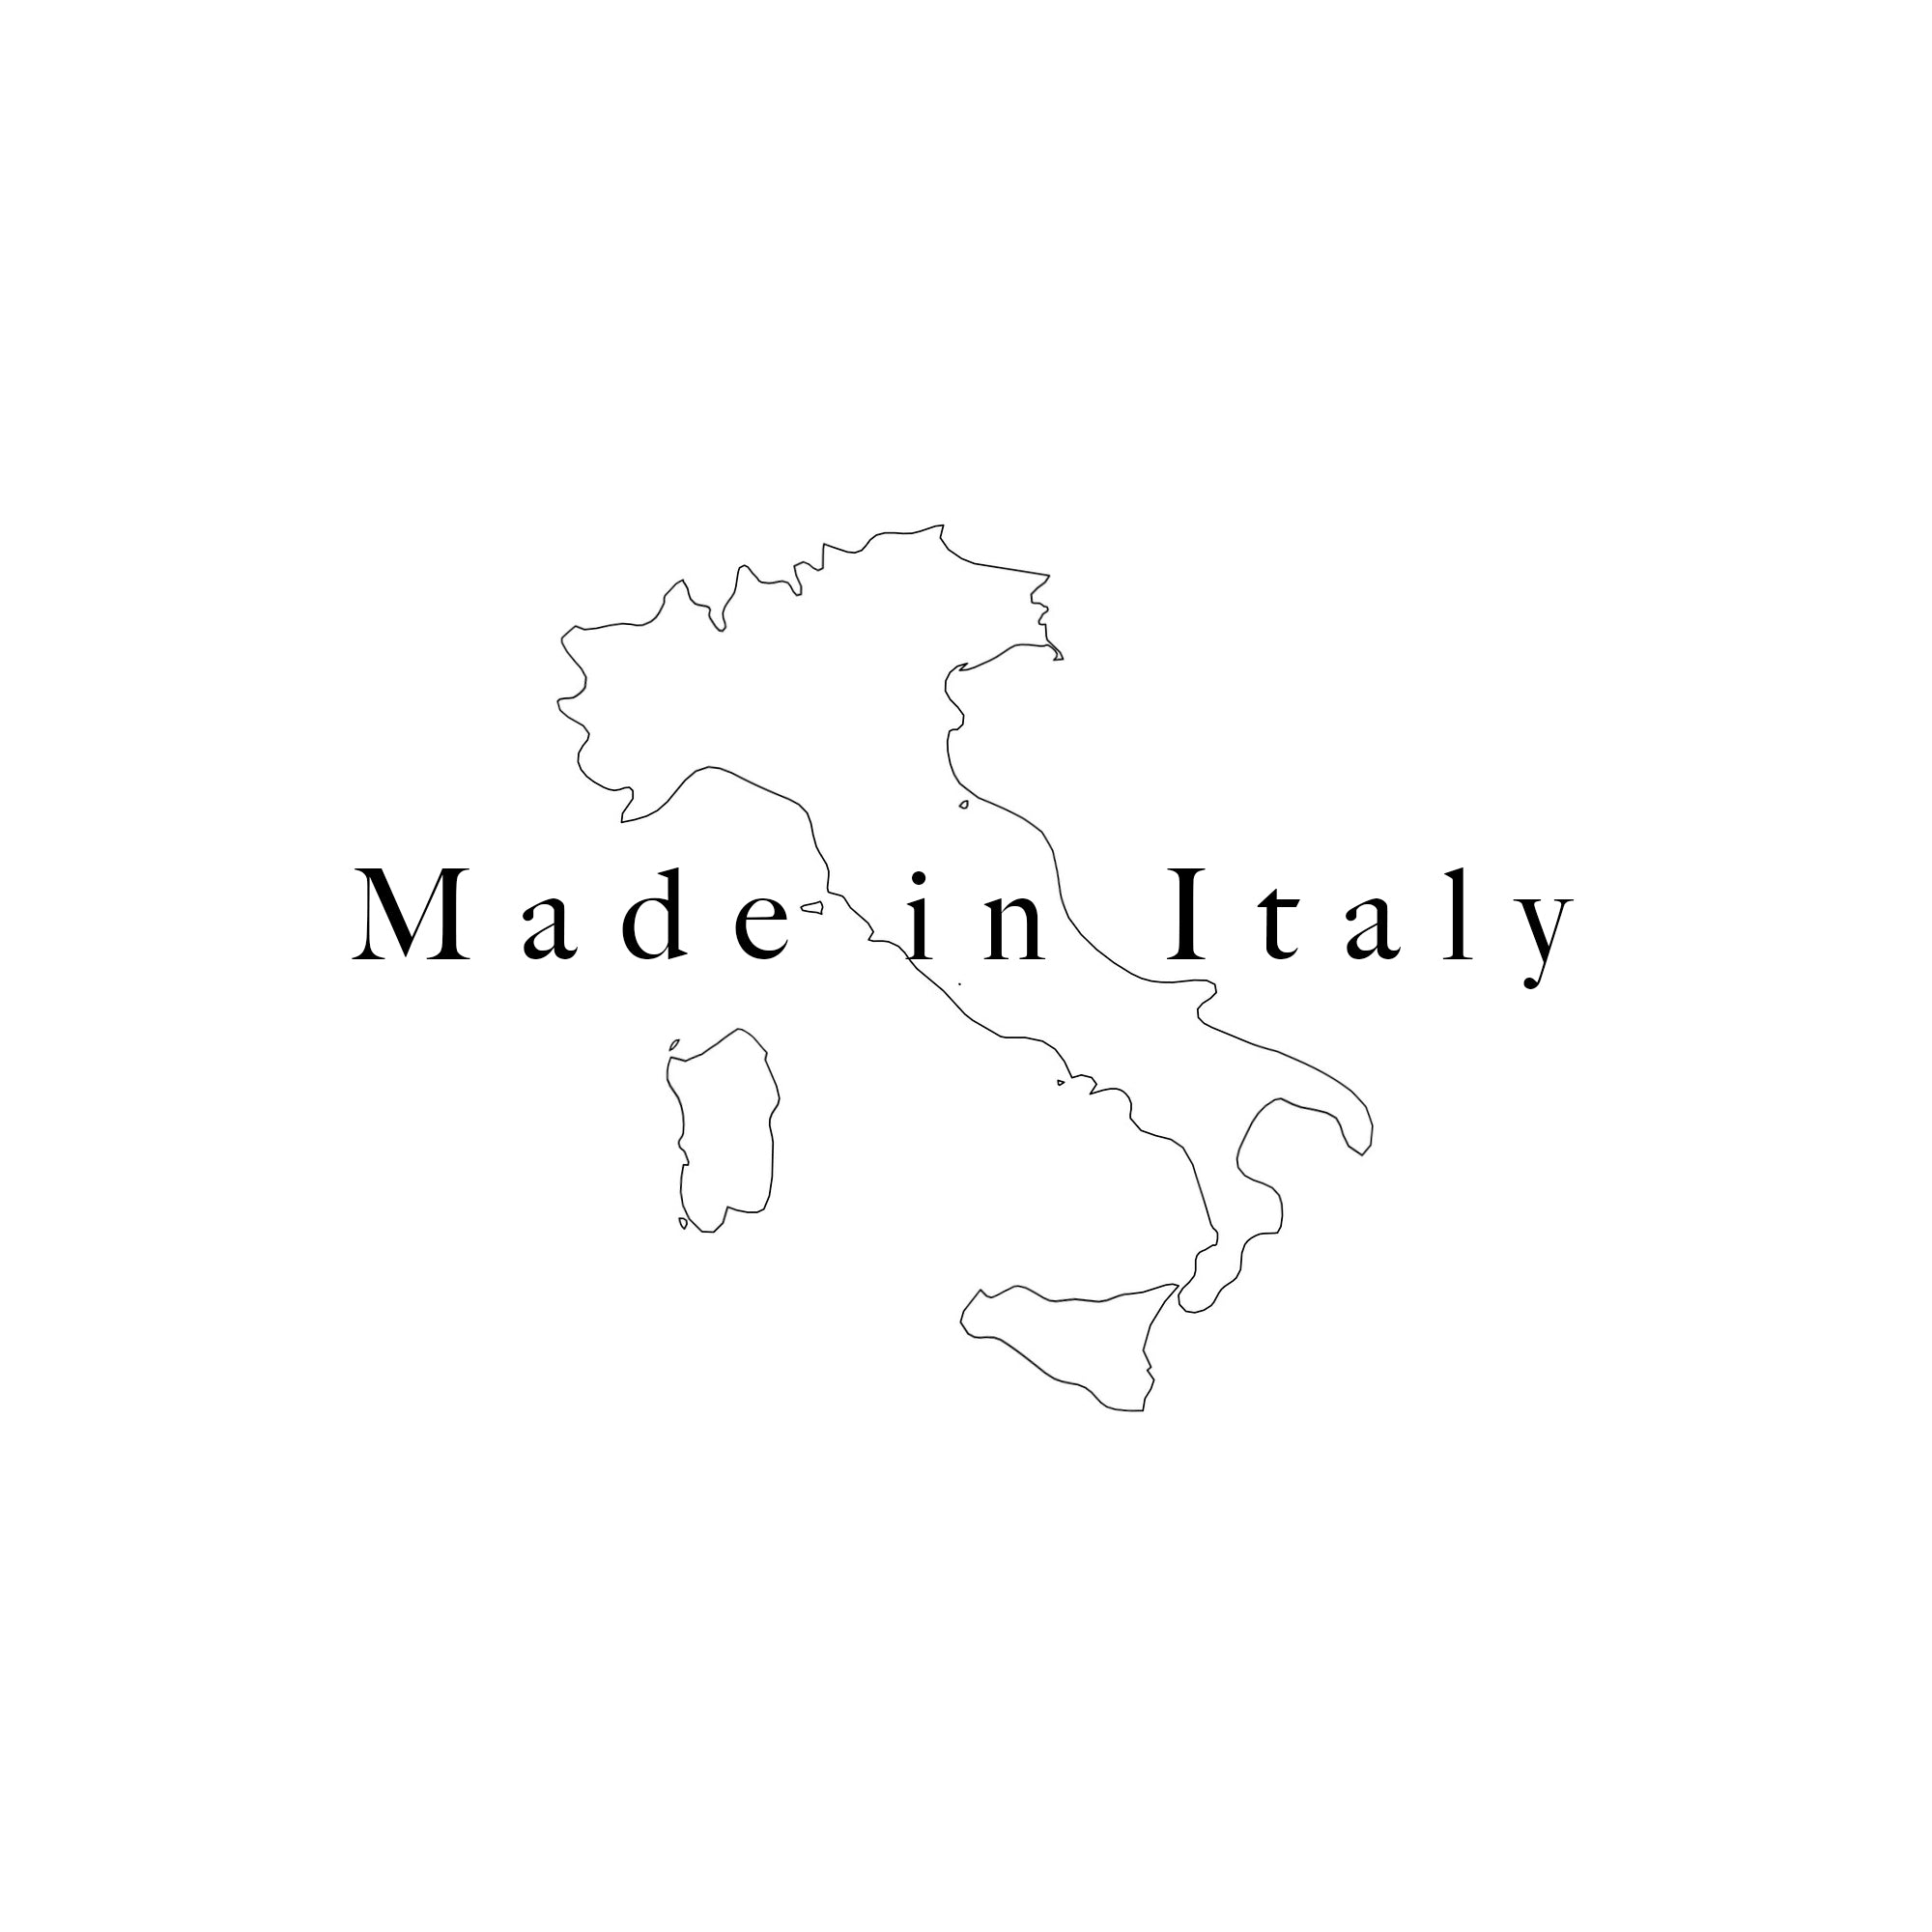 Made in Italy - "Quality is the best form of Sustainability"